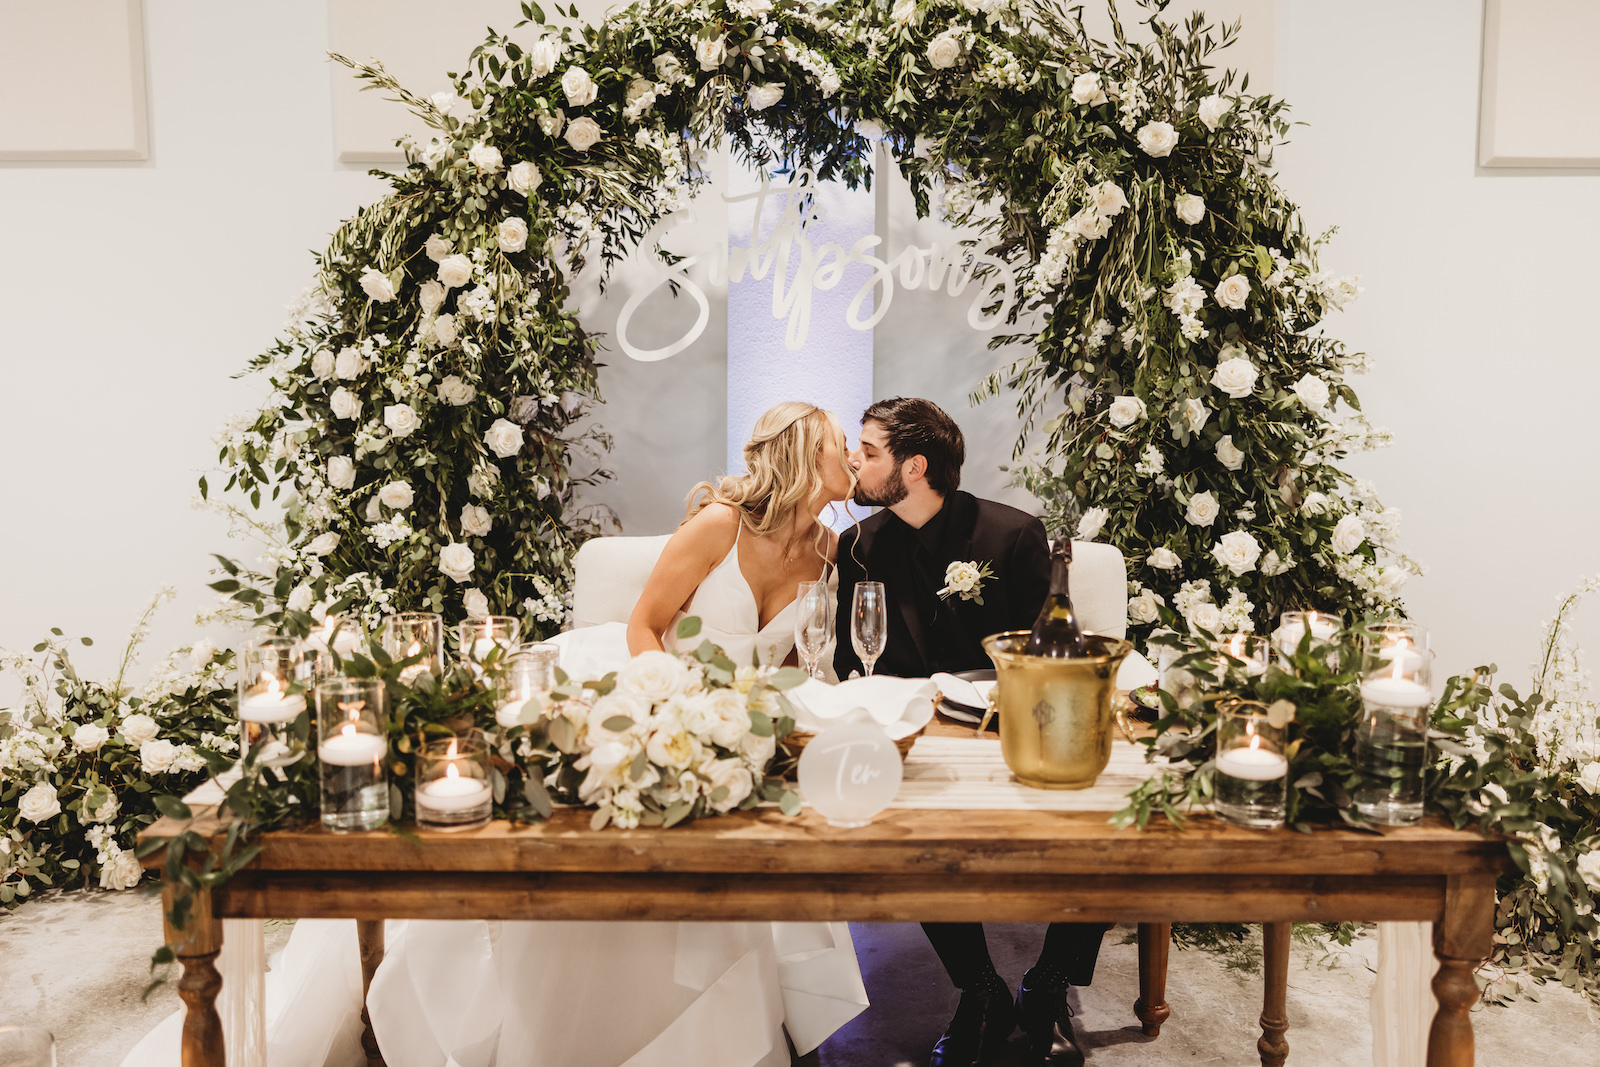 Classic Wedding Reception Decor, Bride and Groom Sitting at Long Wooden Sweetheart Table, Ivory Tufted Loveseat, Lush White Roses and Greenery Floral Arch, Custom Neon Sign, Floating Candles